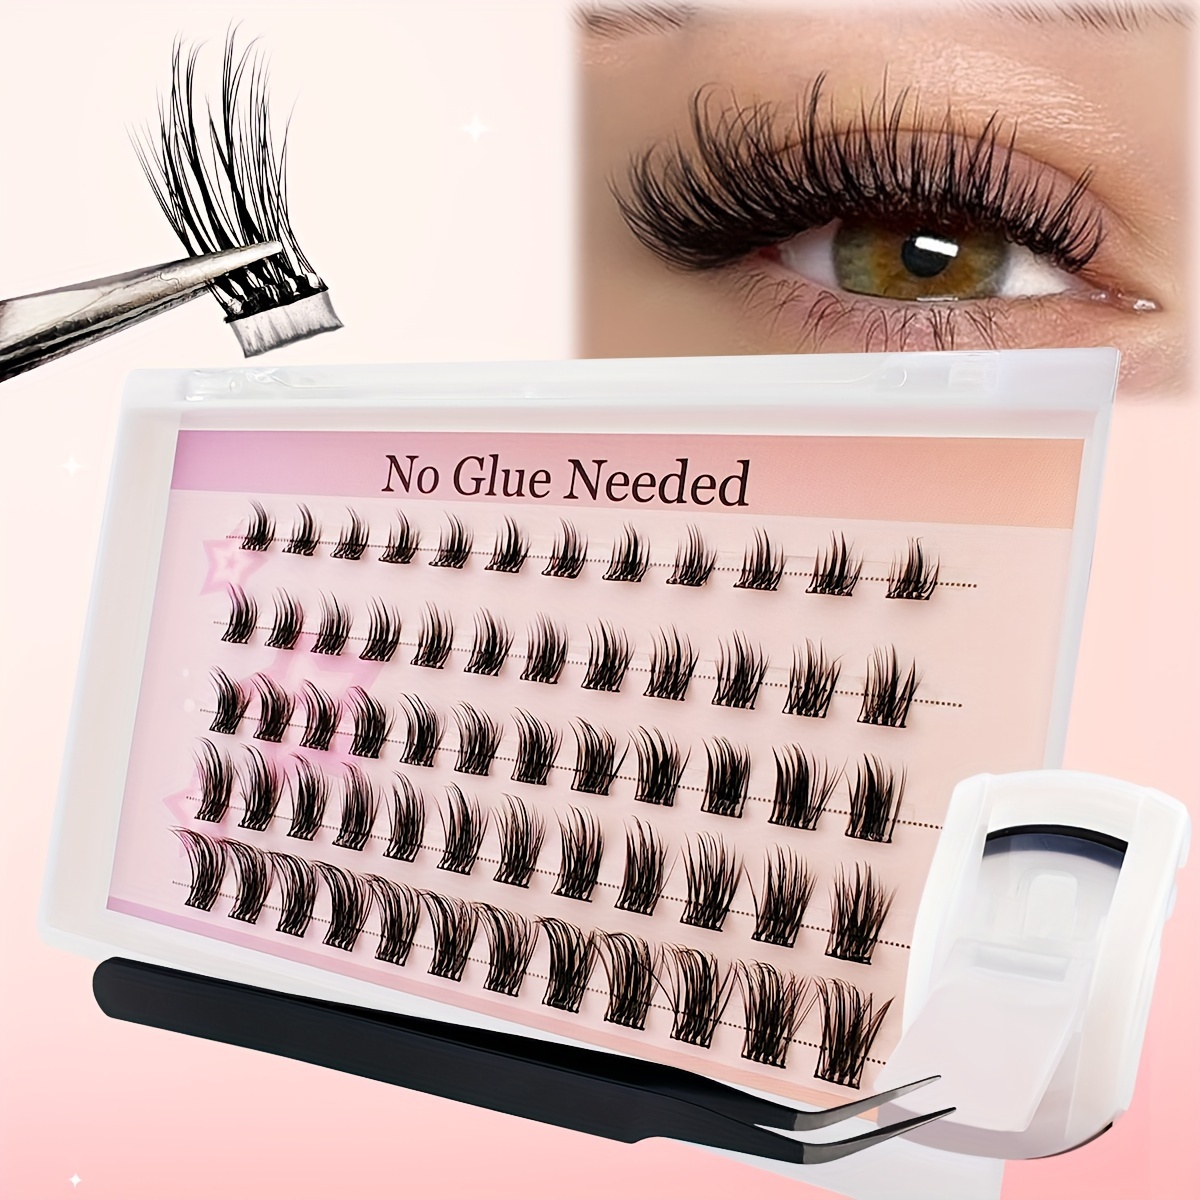 

Self Adhesive Lash Clusters Kit Press-on Diy Lash Extension Reusable Cluster Lashes 60 Pcs Fuss Free No Sticky Residue Self Application At Home 8-16mm